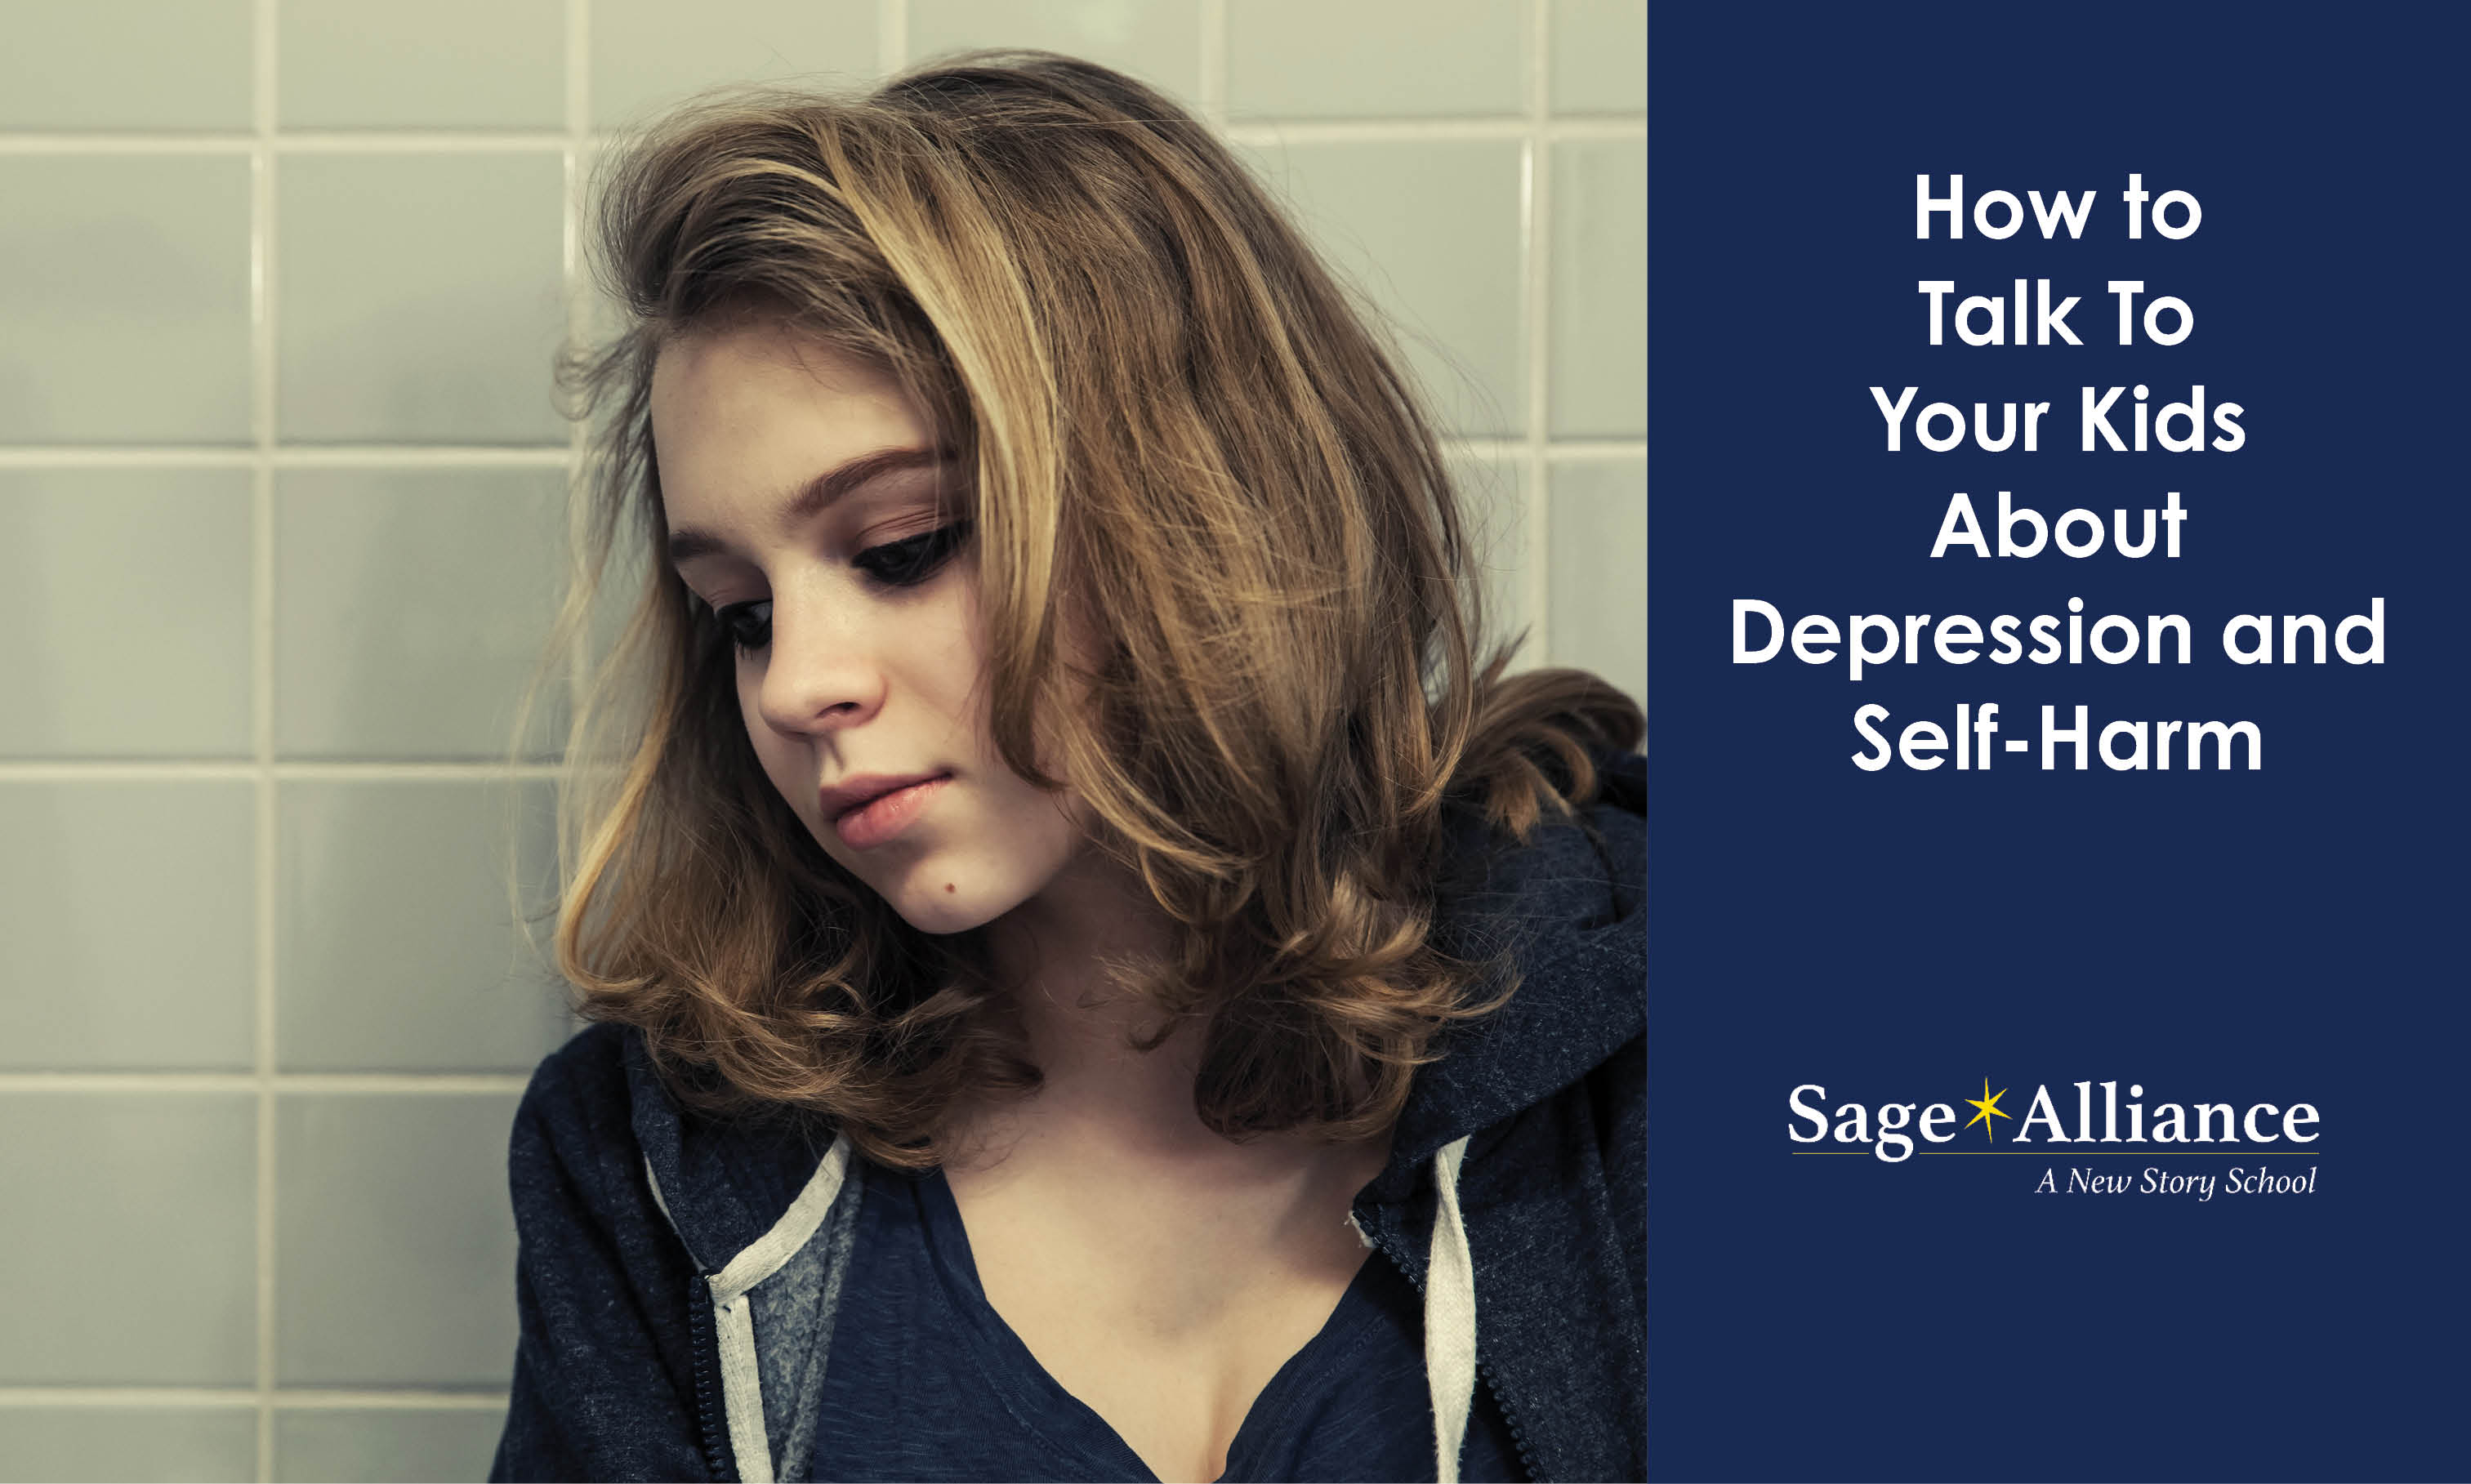 How to Talk To Your Kids About Depression and Self-Harm 